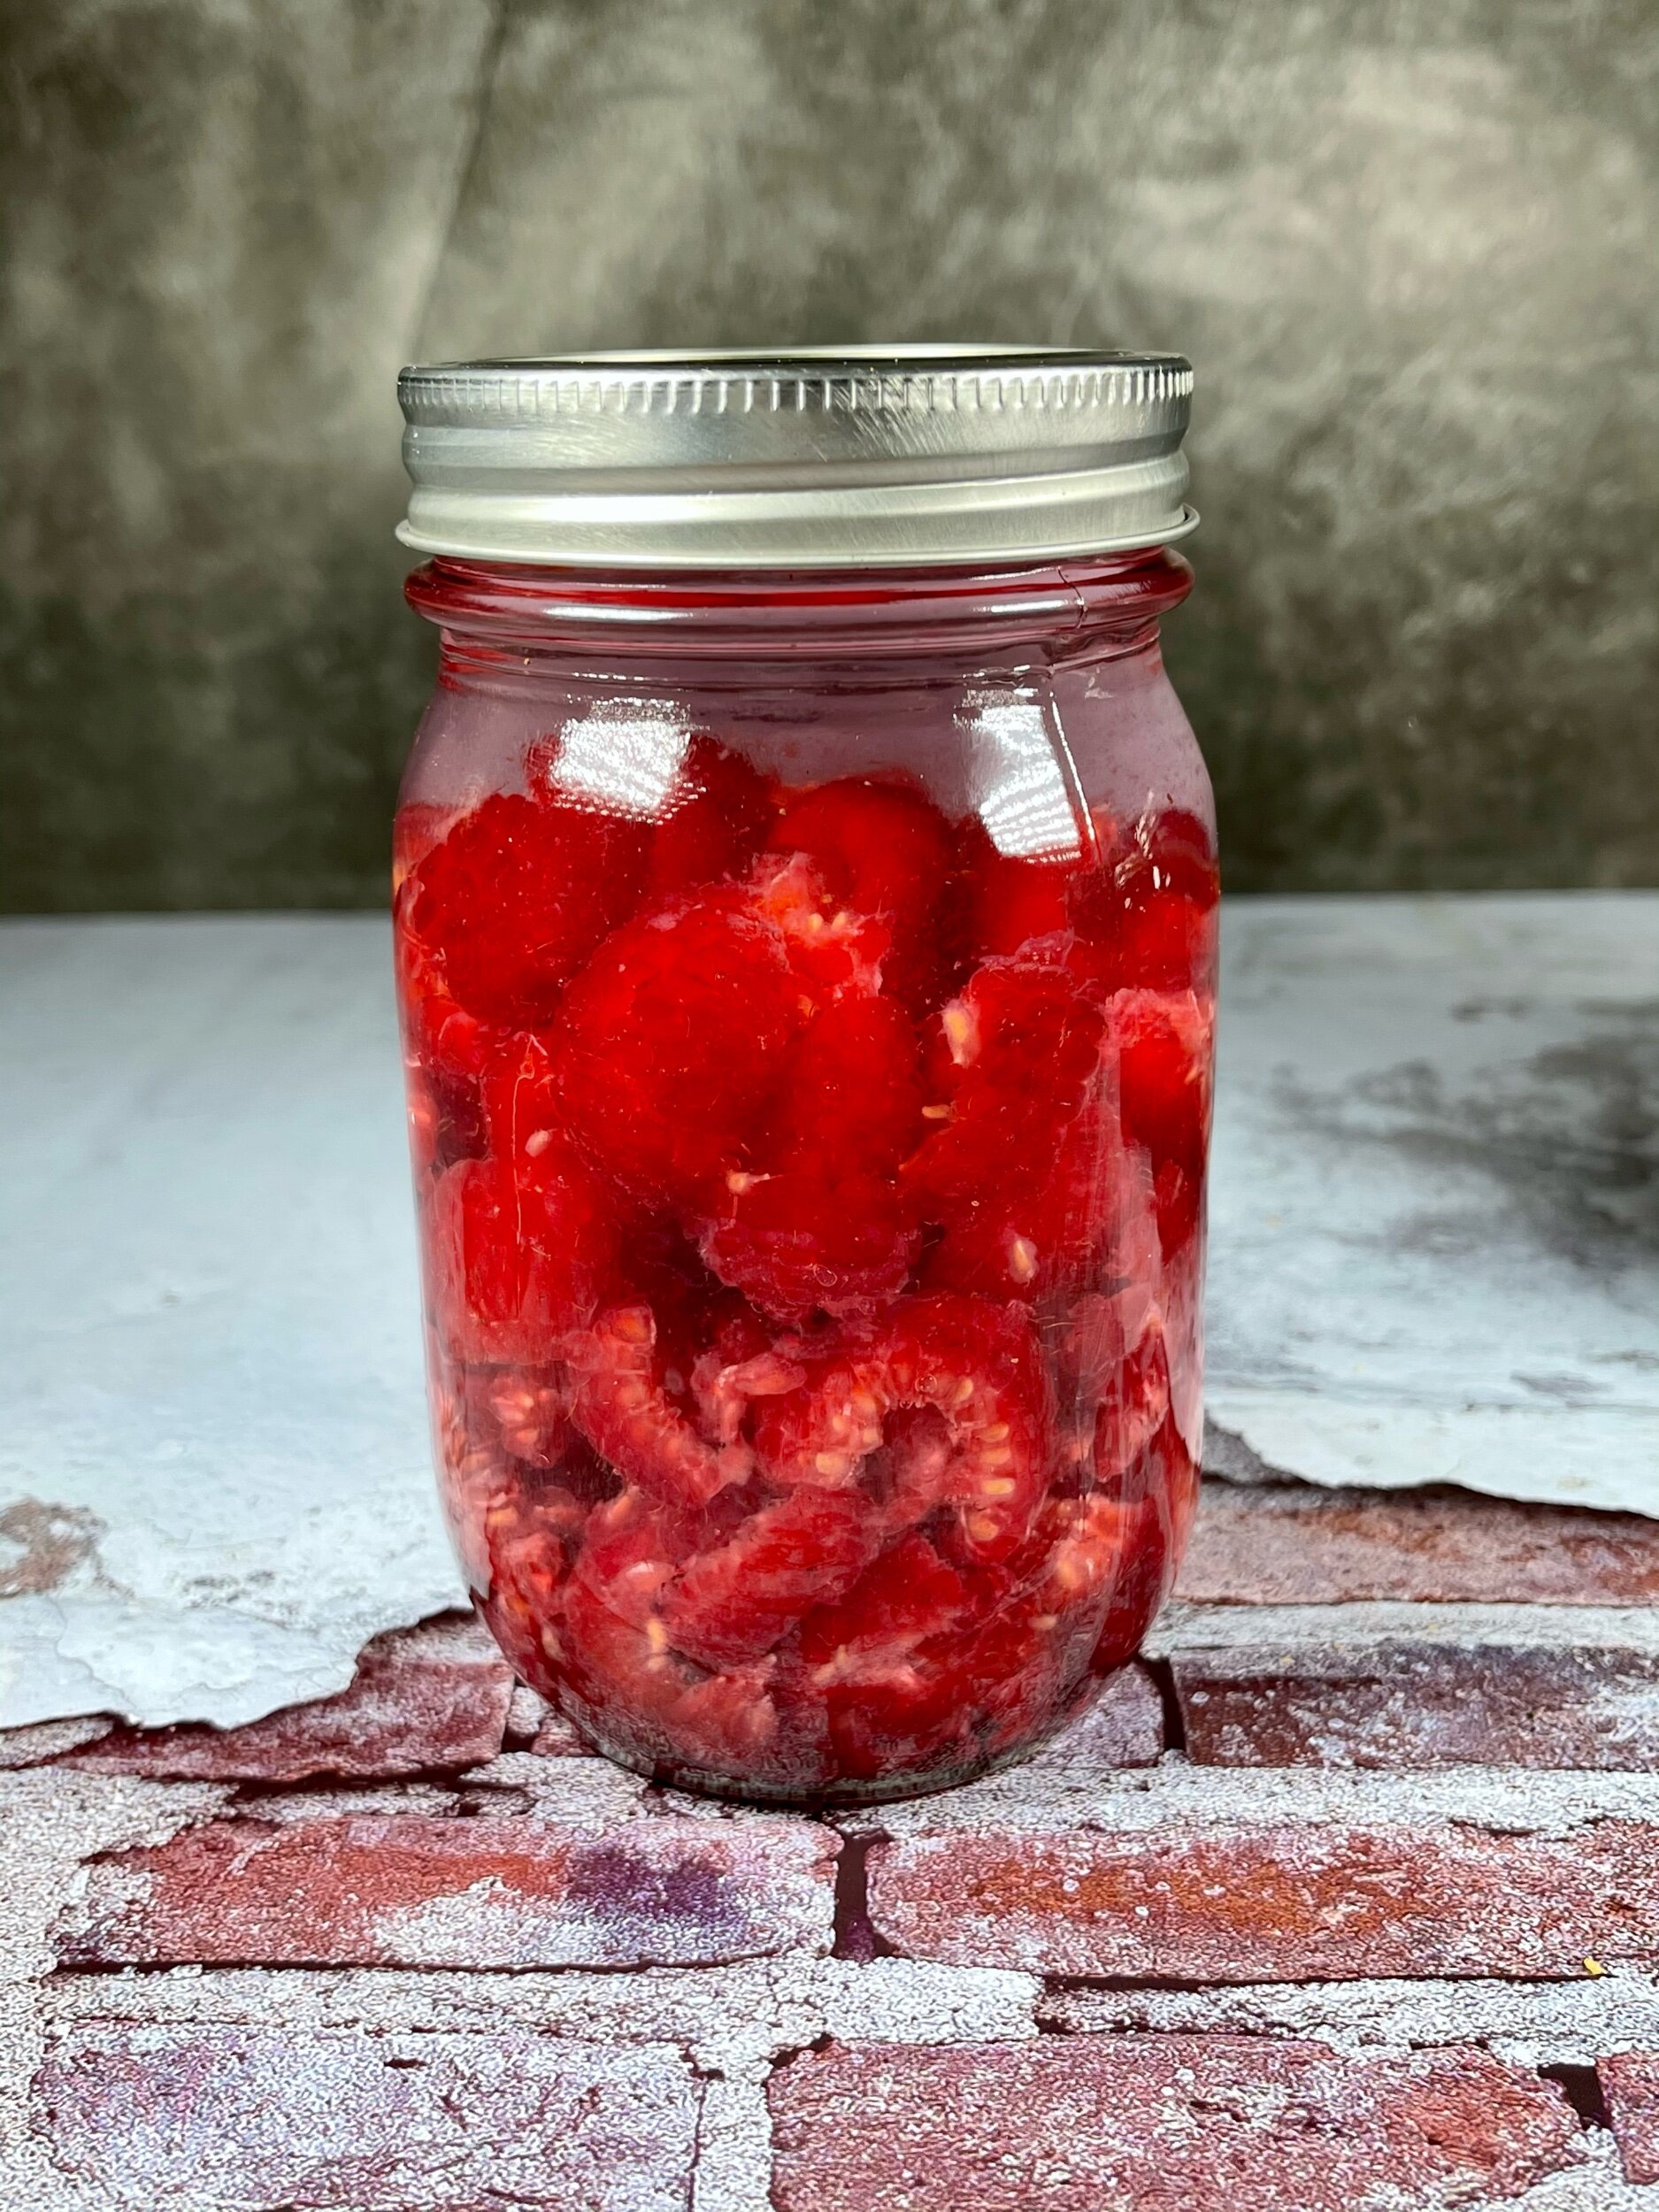  Chopped raspberries back in their jar and vodka added,making sure they are all submerged. 